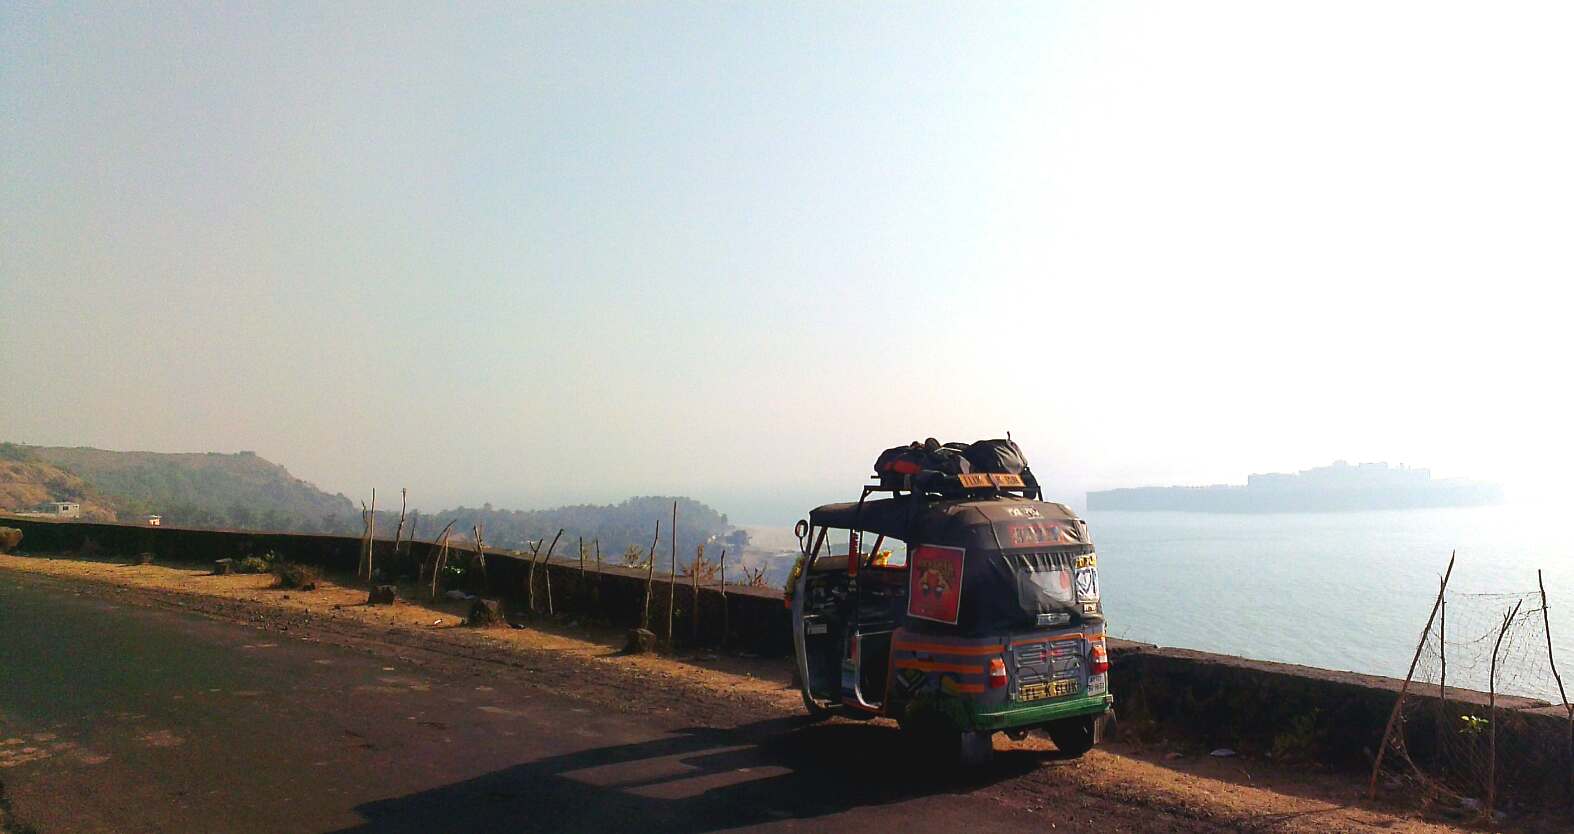 Day 7 on the road to Murud